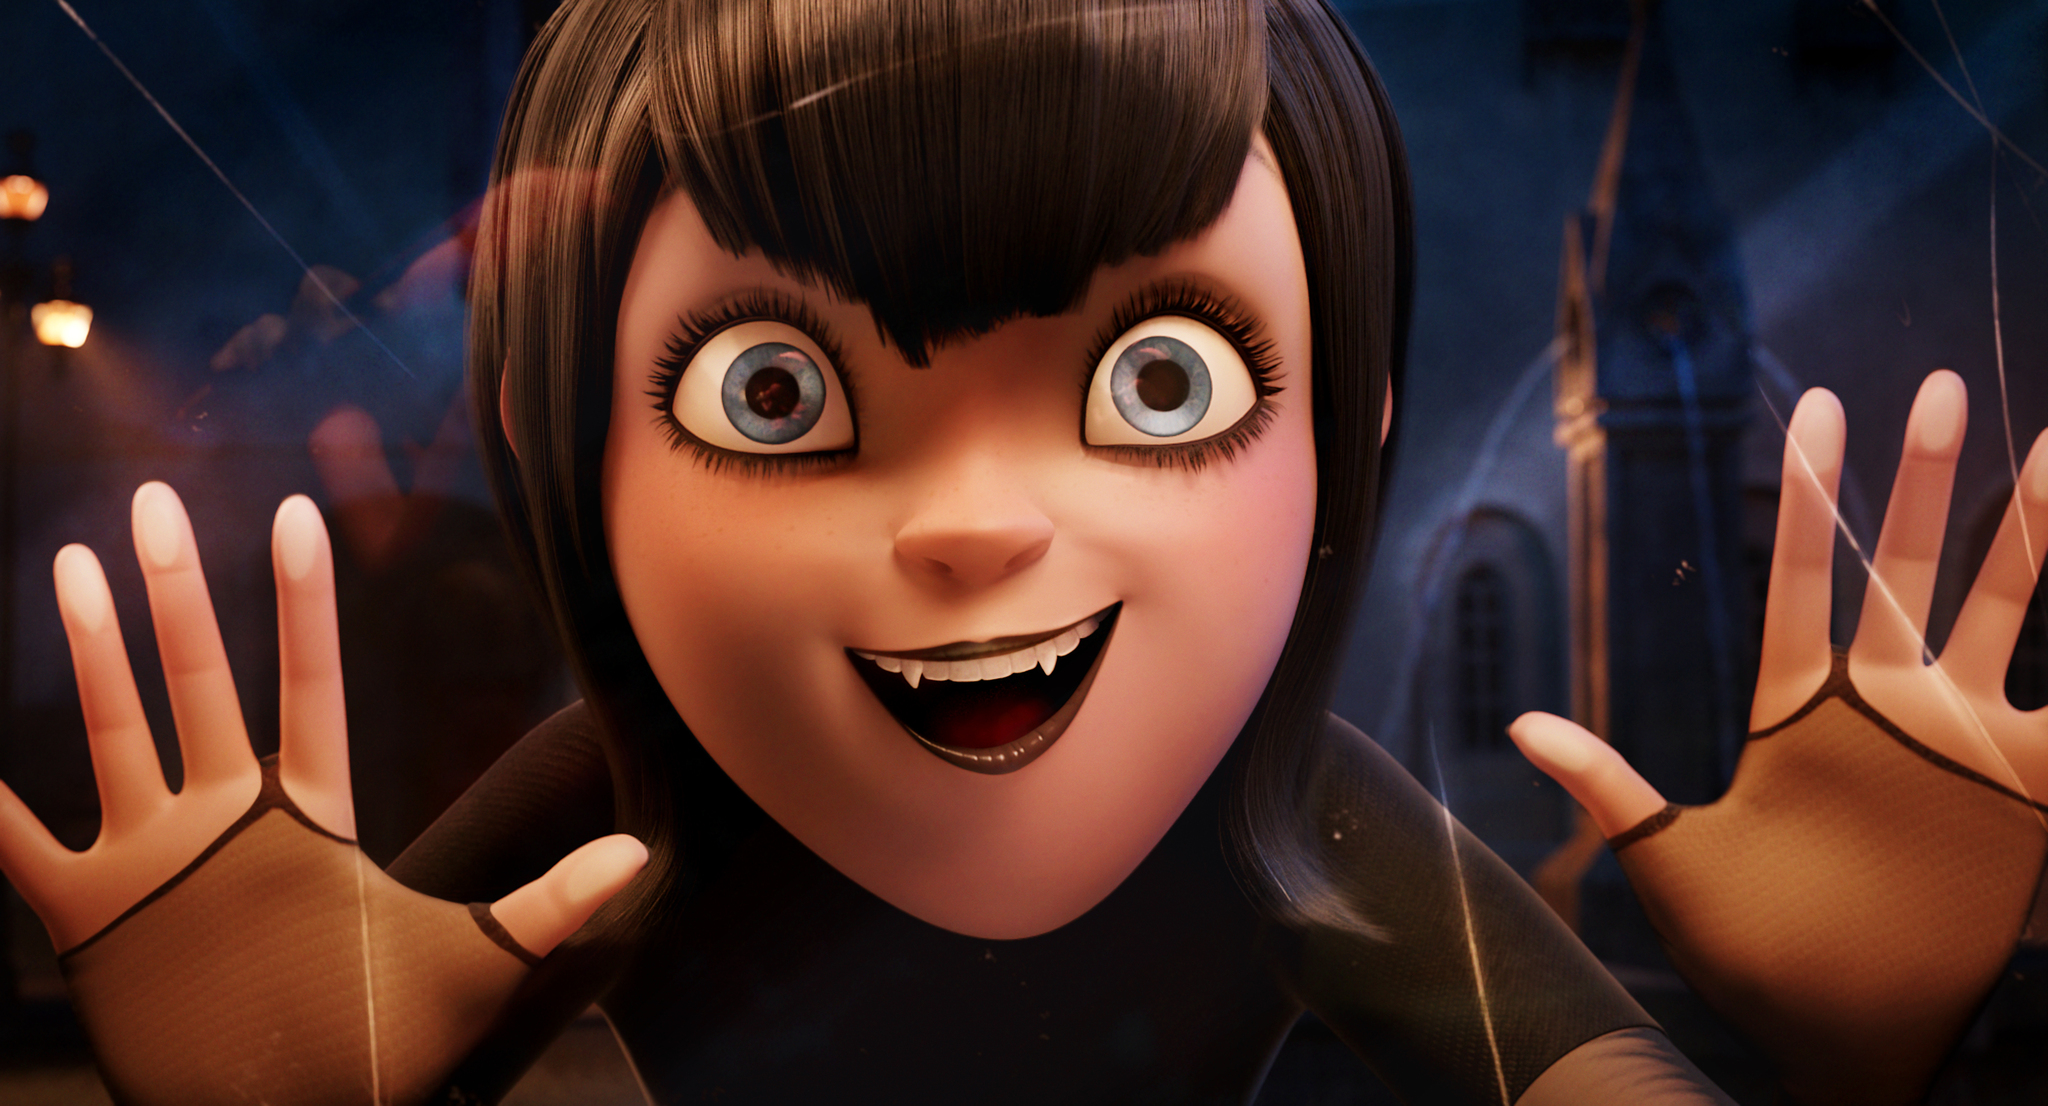 barbra moon recommends images of mavis from hotel transylvania pic